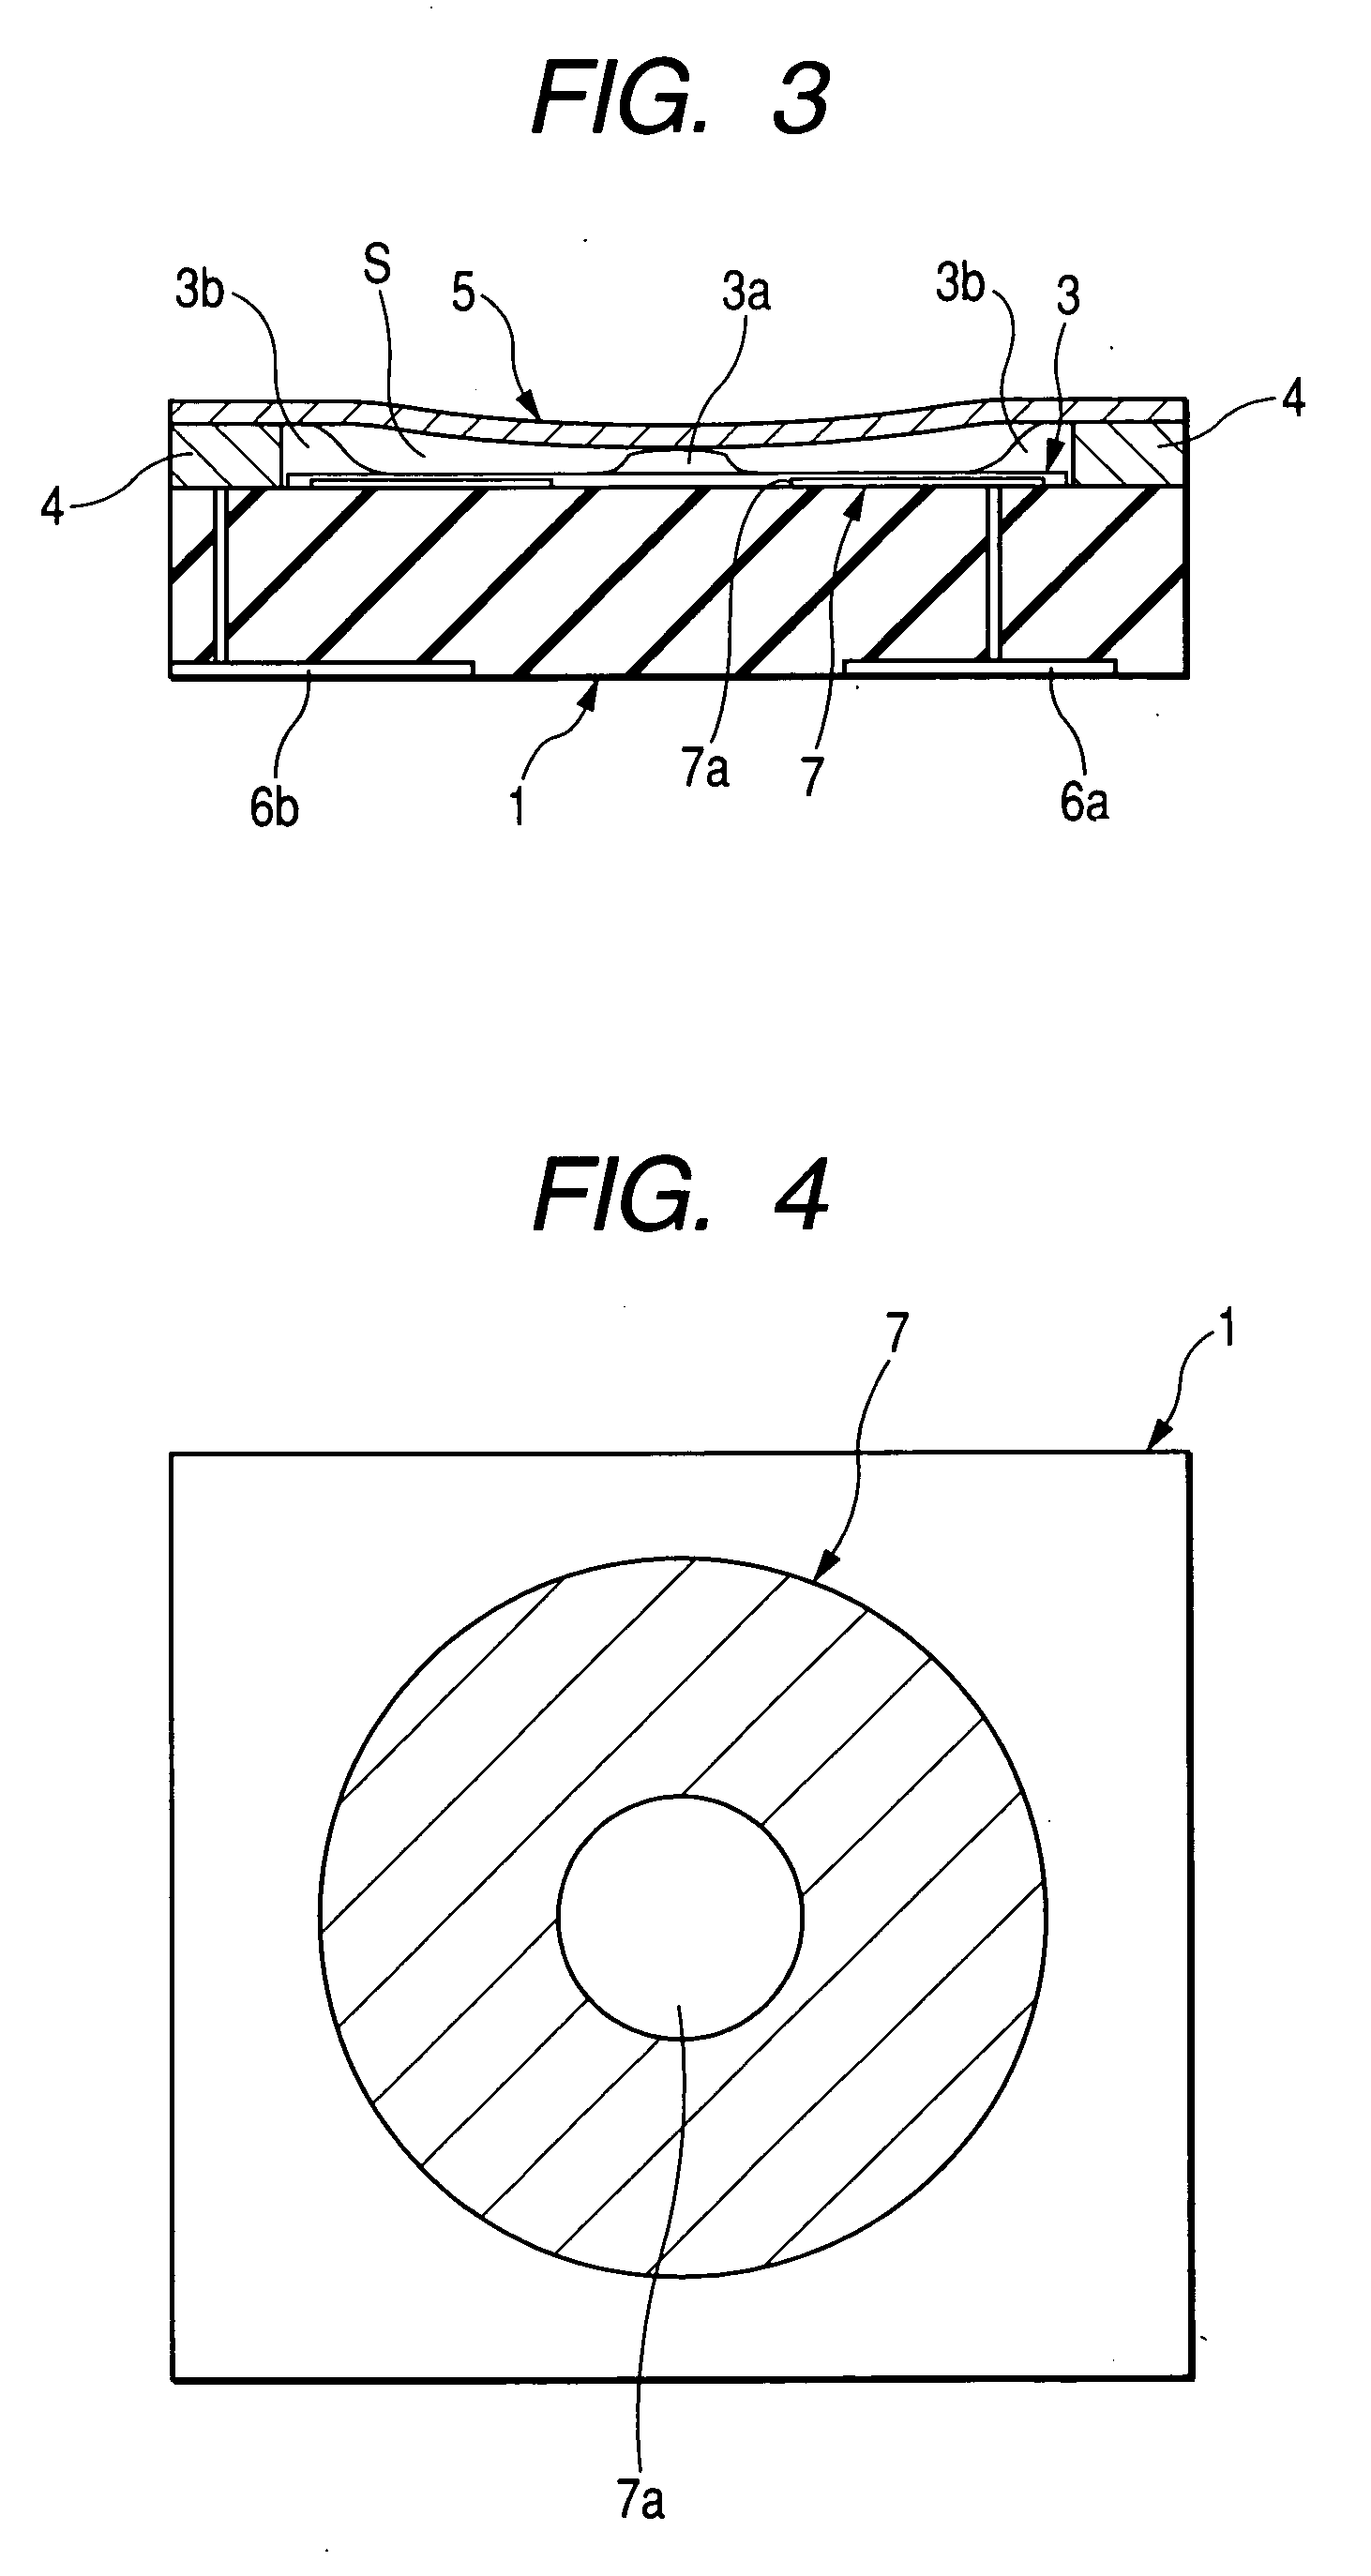 Pressure sensor for detecting pressure by using capacitance variation according to deflection of diaphragm